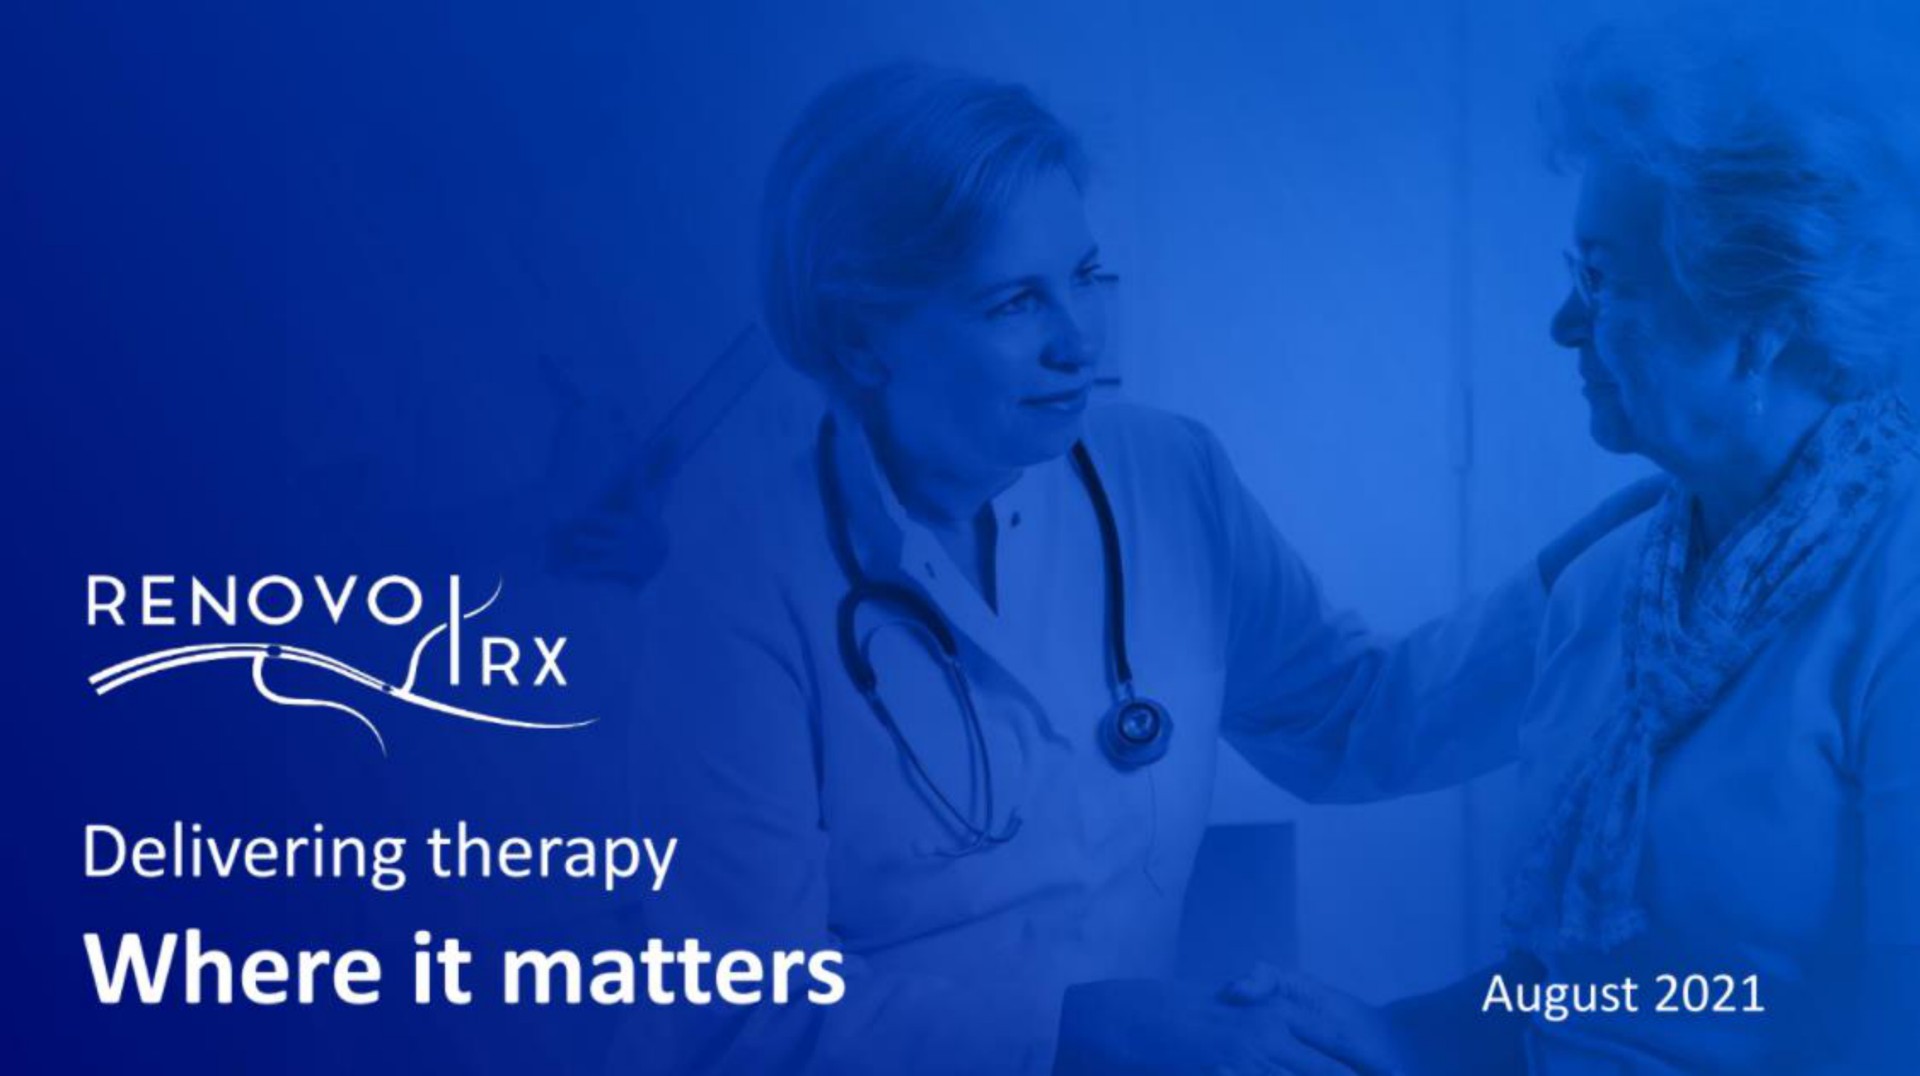 sew delivering therapy where it matters | RenovoRx